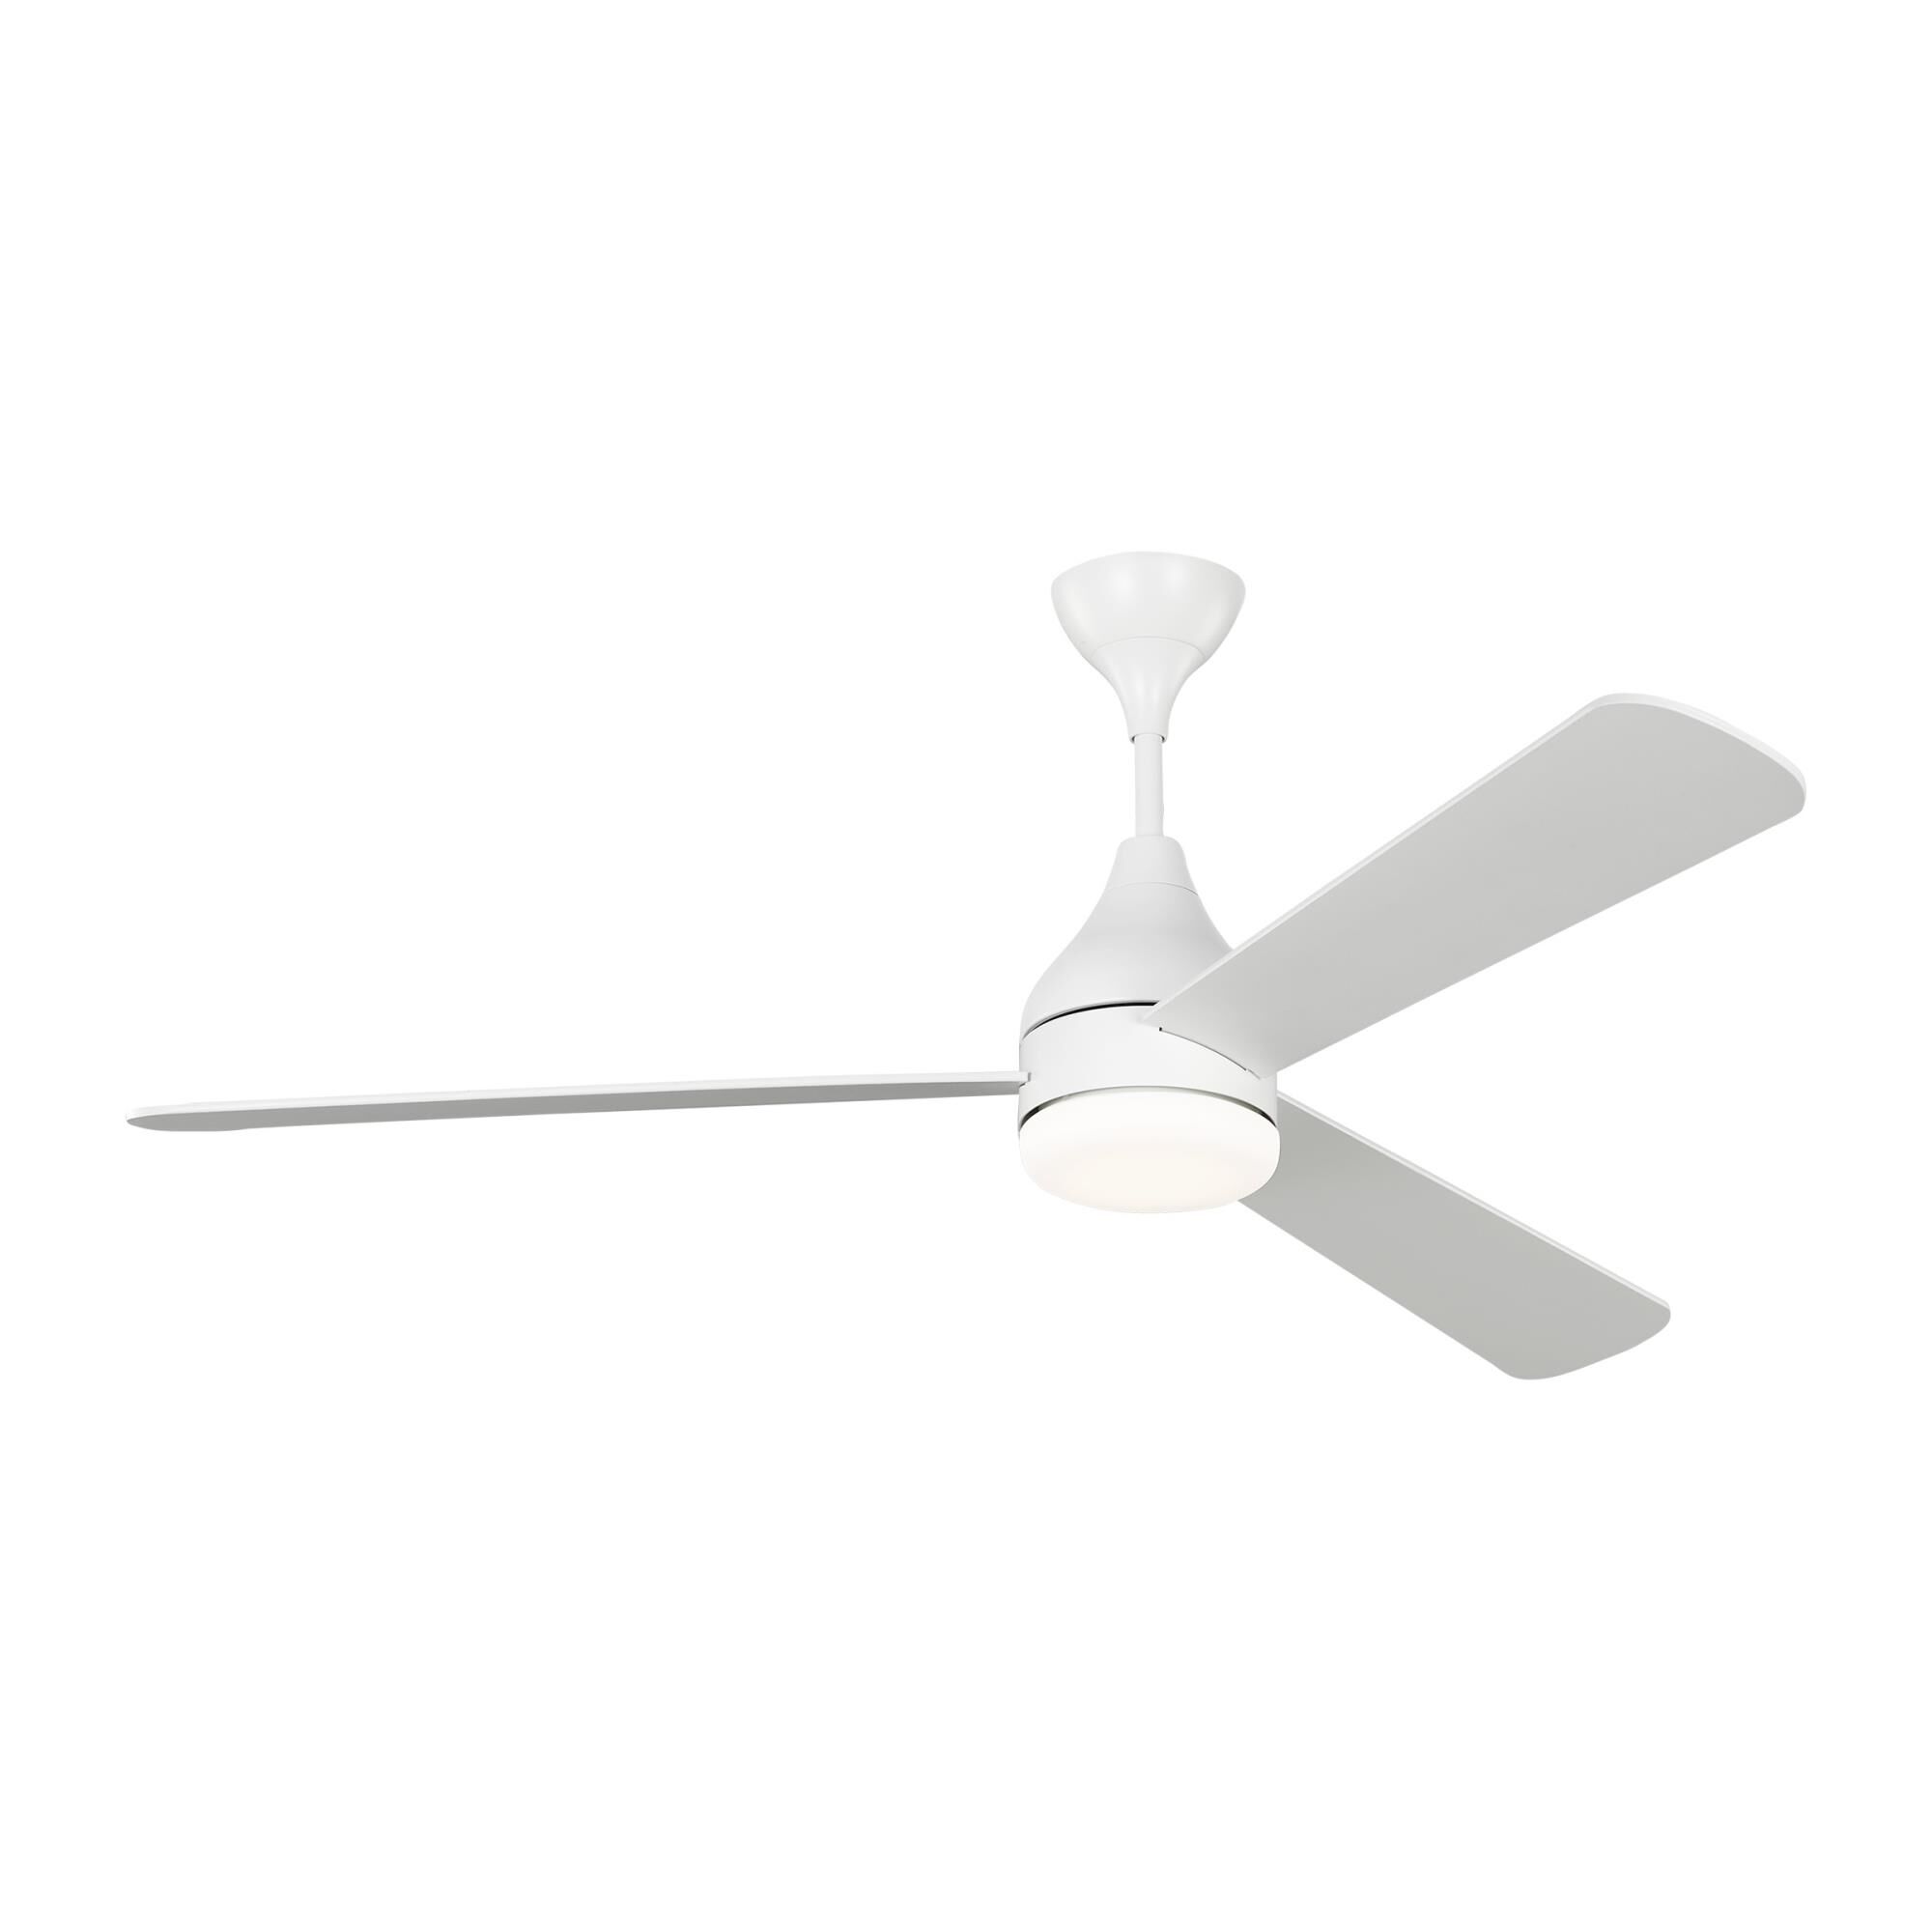 Photos - Fan Visual Comfort  Collection Barbara Barry Streaming Smart 60 Inch Ceilin